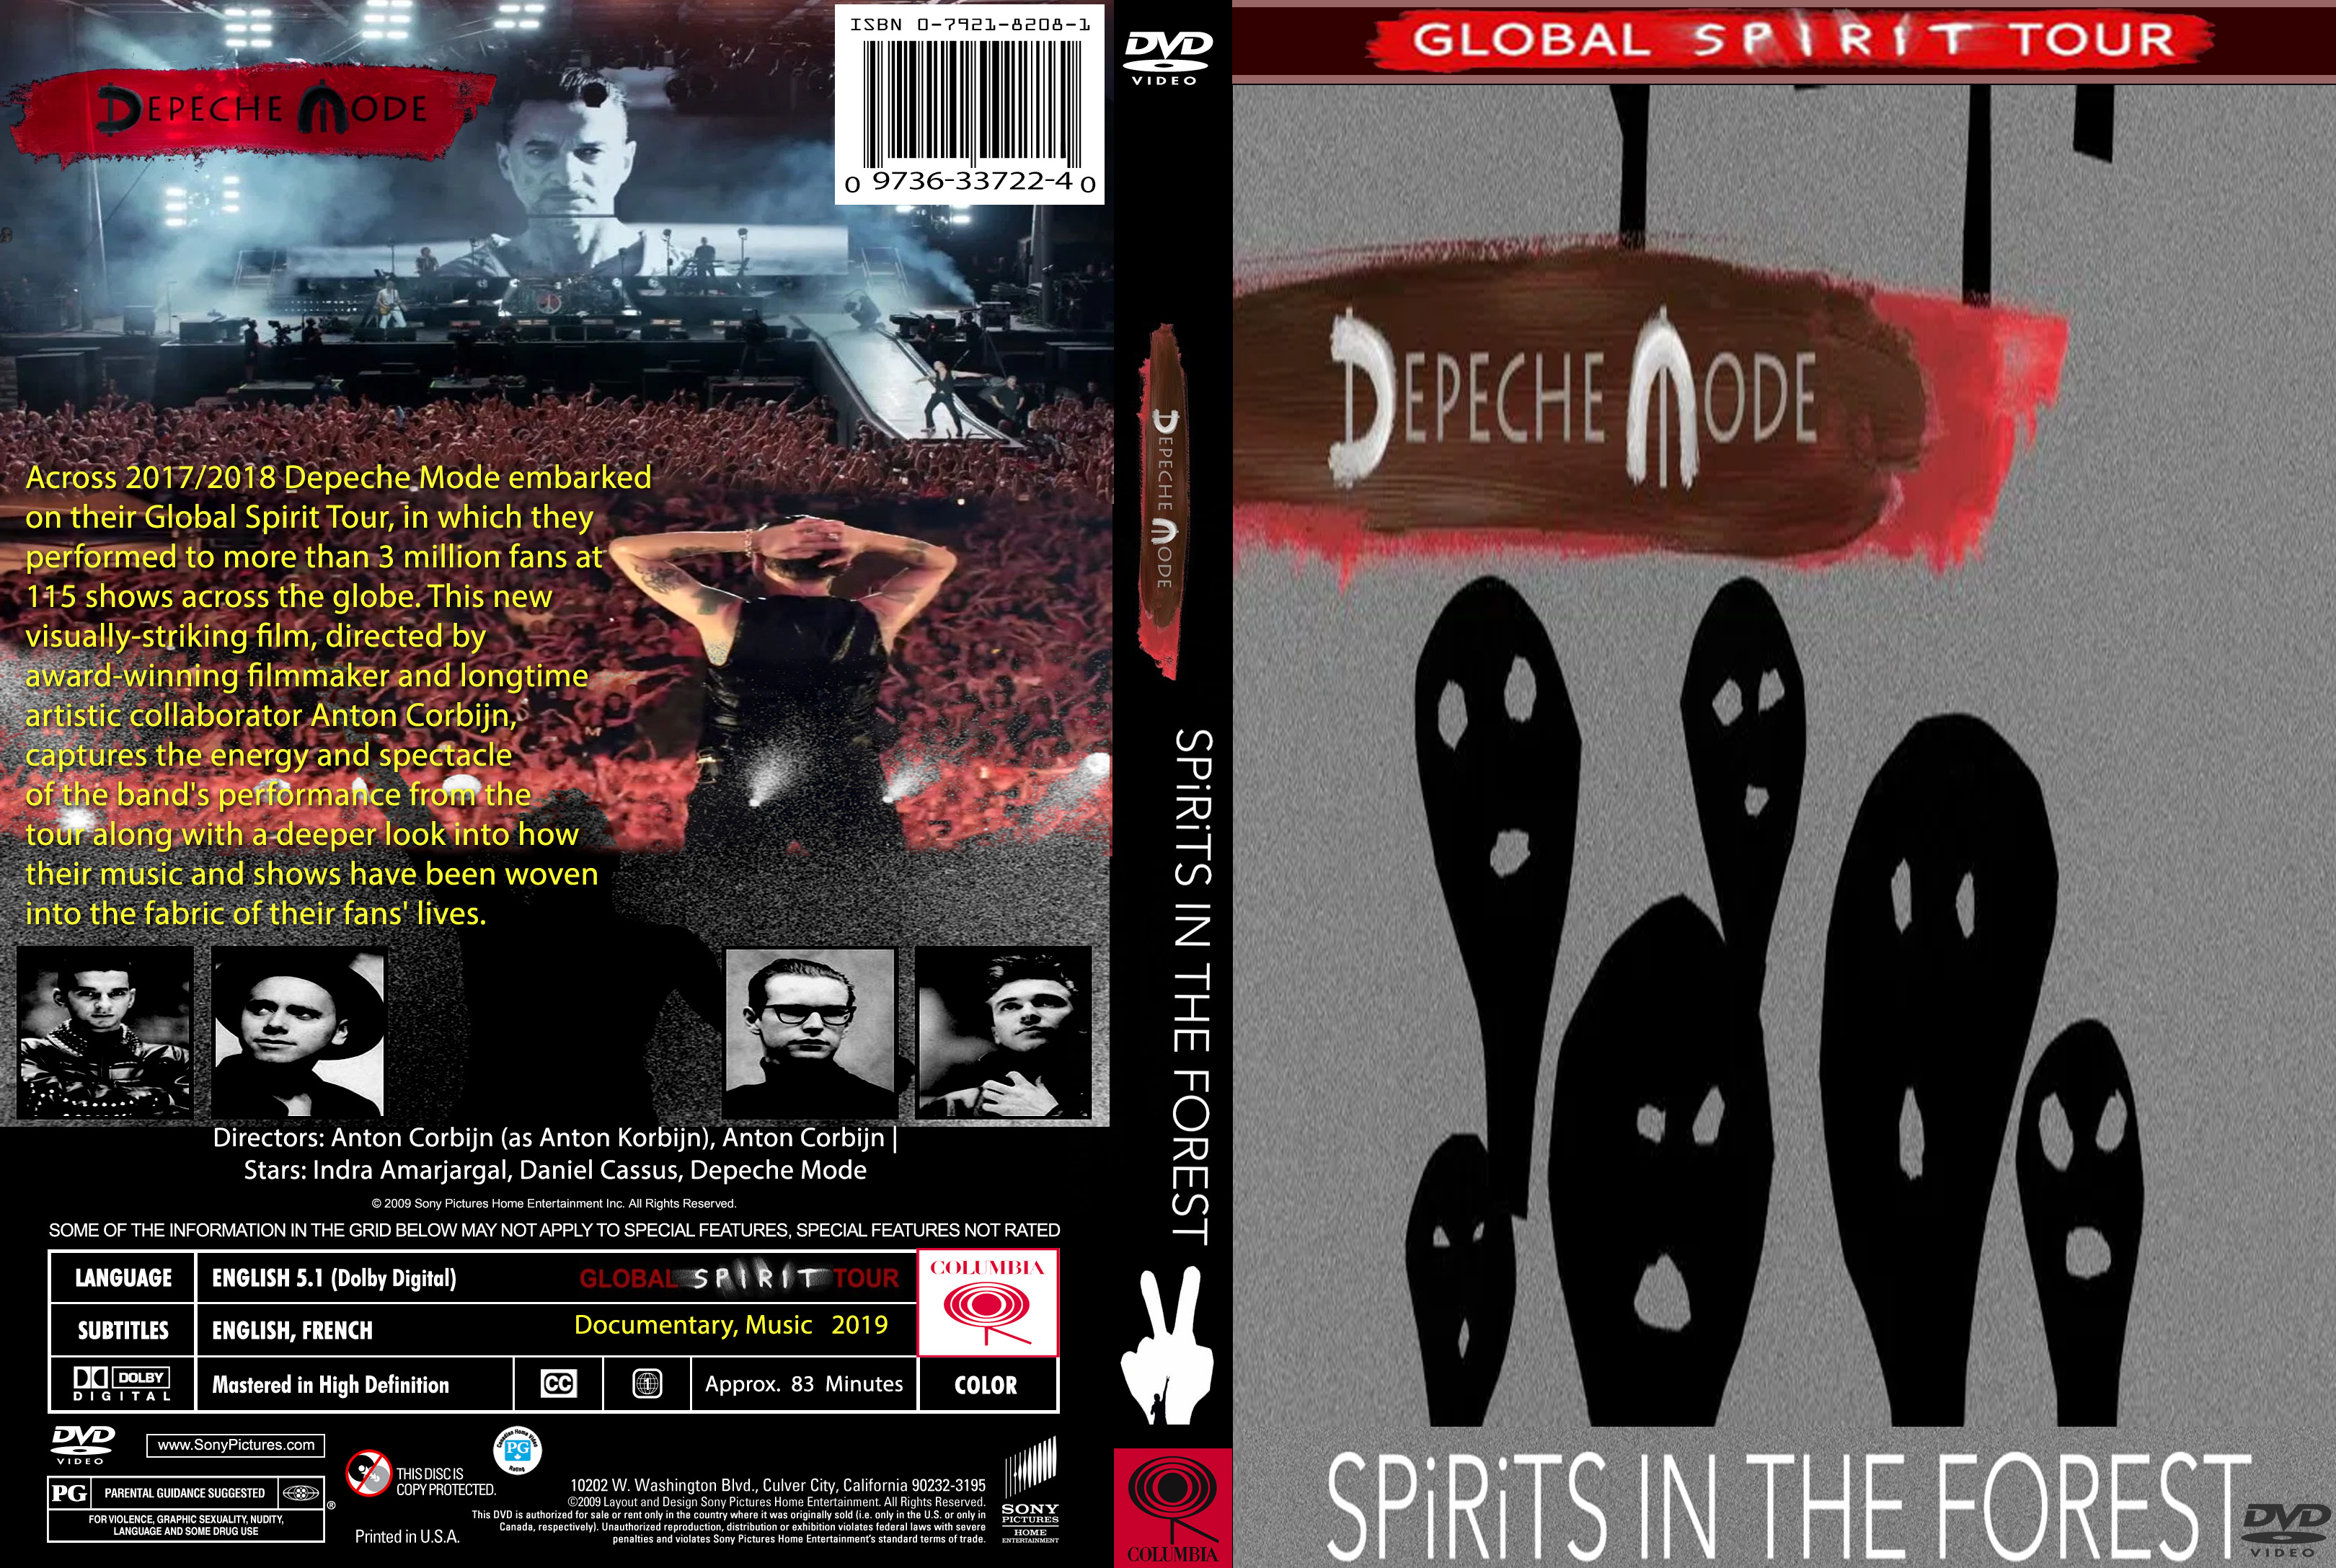 kemikalier auktion Legeme COVERS.BOX.SK ::: Depeche Mode: Presents 'SPIRITS in the Forest'  Documentary (2019) - high quality DVD / Blueray / Movie